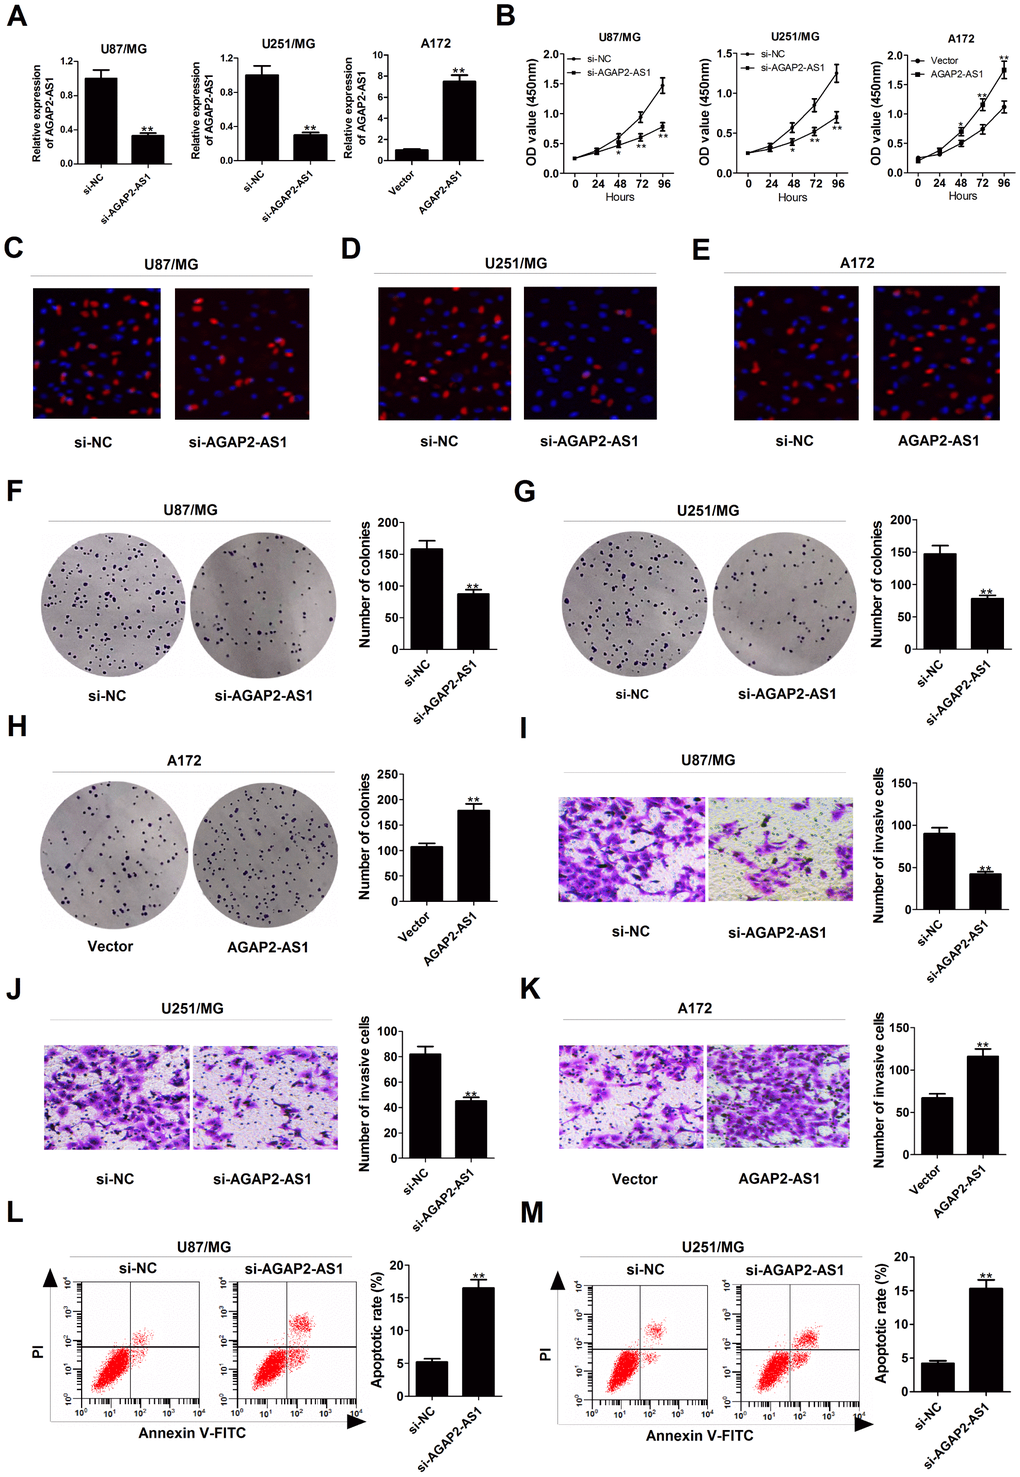 Silencing of AGAP2-AS1 represses proliferation and invasion, and promoted apoptosis in GBM cells. U87/MG and U251/MG cells were transfected with si-NC or si-AGAP2-AS1, while A172 cells were introduced with empty vector or pcDNA-AGAP2-AS1. (A) qRT-PCR analysis of transfection efficiency in U87/MG, U251/MG and A172 cells. (B) CCK-8 analysis was conducted to detect the viability in transfected U87/MG, U251/MG and A172 cells. (C–E) (d) EdU staining assay was performed to evaluate the proliferation ability in transfected U87/MG, U251/MG and A172 cells. Red, EdU staining for dividing cell; blue, DAPI staining for nuclear. (F–H) Colony-forming assay was used to examine the cloning ability in transfected U87/MG, U251/MG and A172 cells. (I–K) Transwell assay was carried out to assess the invasiveness in transfected U87/MG, U251/MG and A172 cells. (L and M) Flow cytometry analysis was applied to determine the apoptotic rate in transfected U87/MG, U251/MG and A172 cells. *P **P 